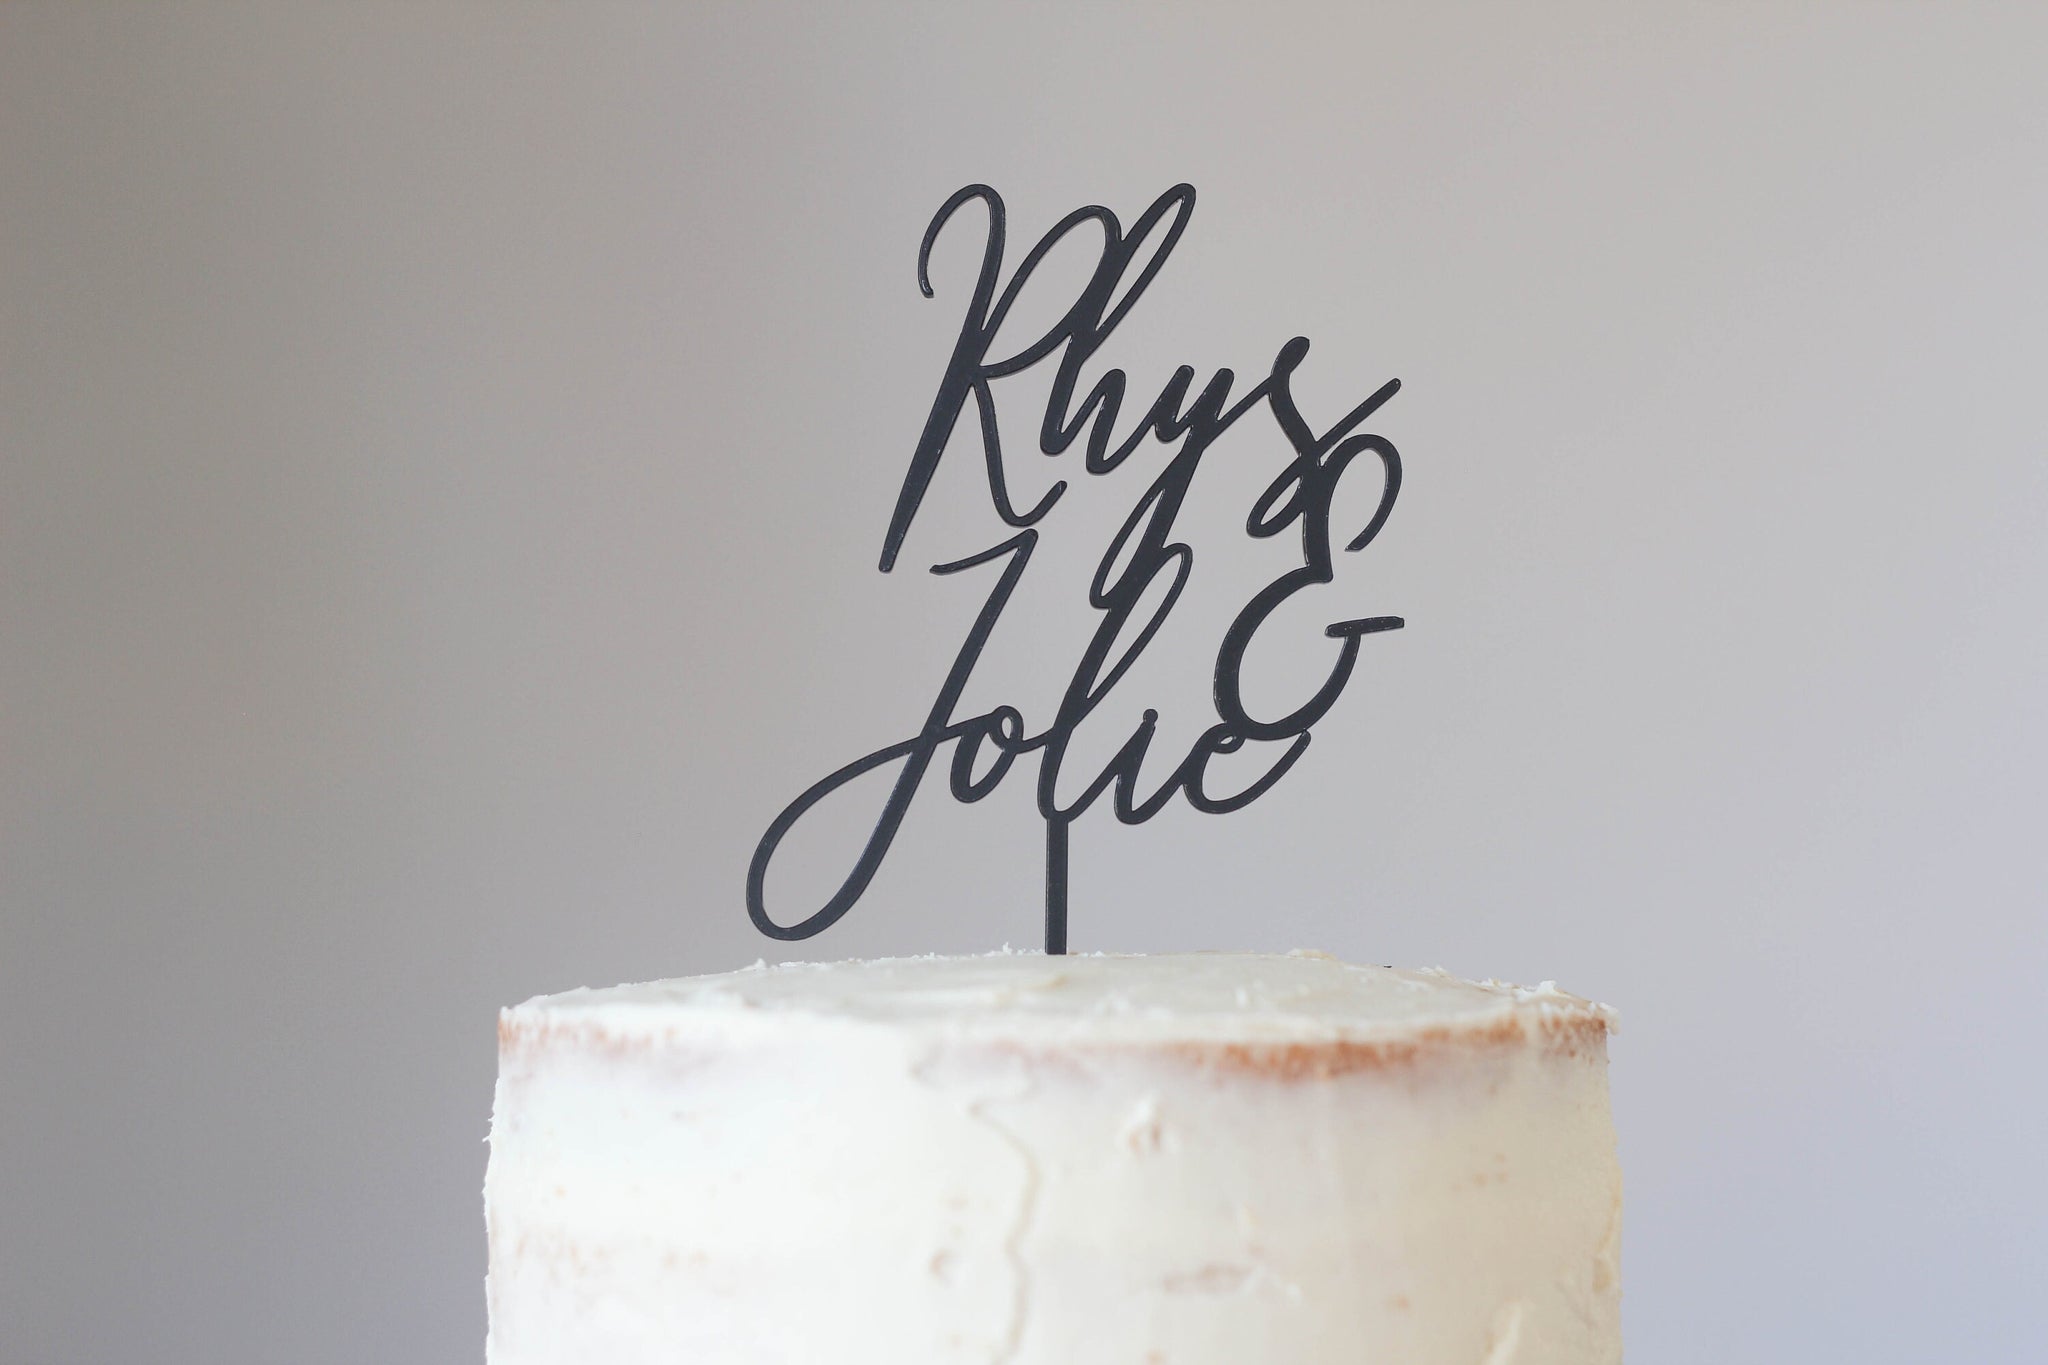 Contemporary Wedding Cake Topper With The Bride And Groom's First Name